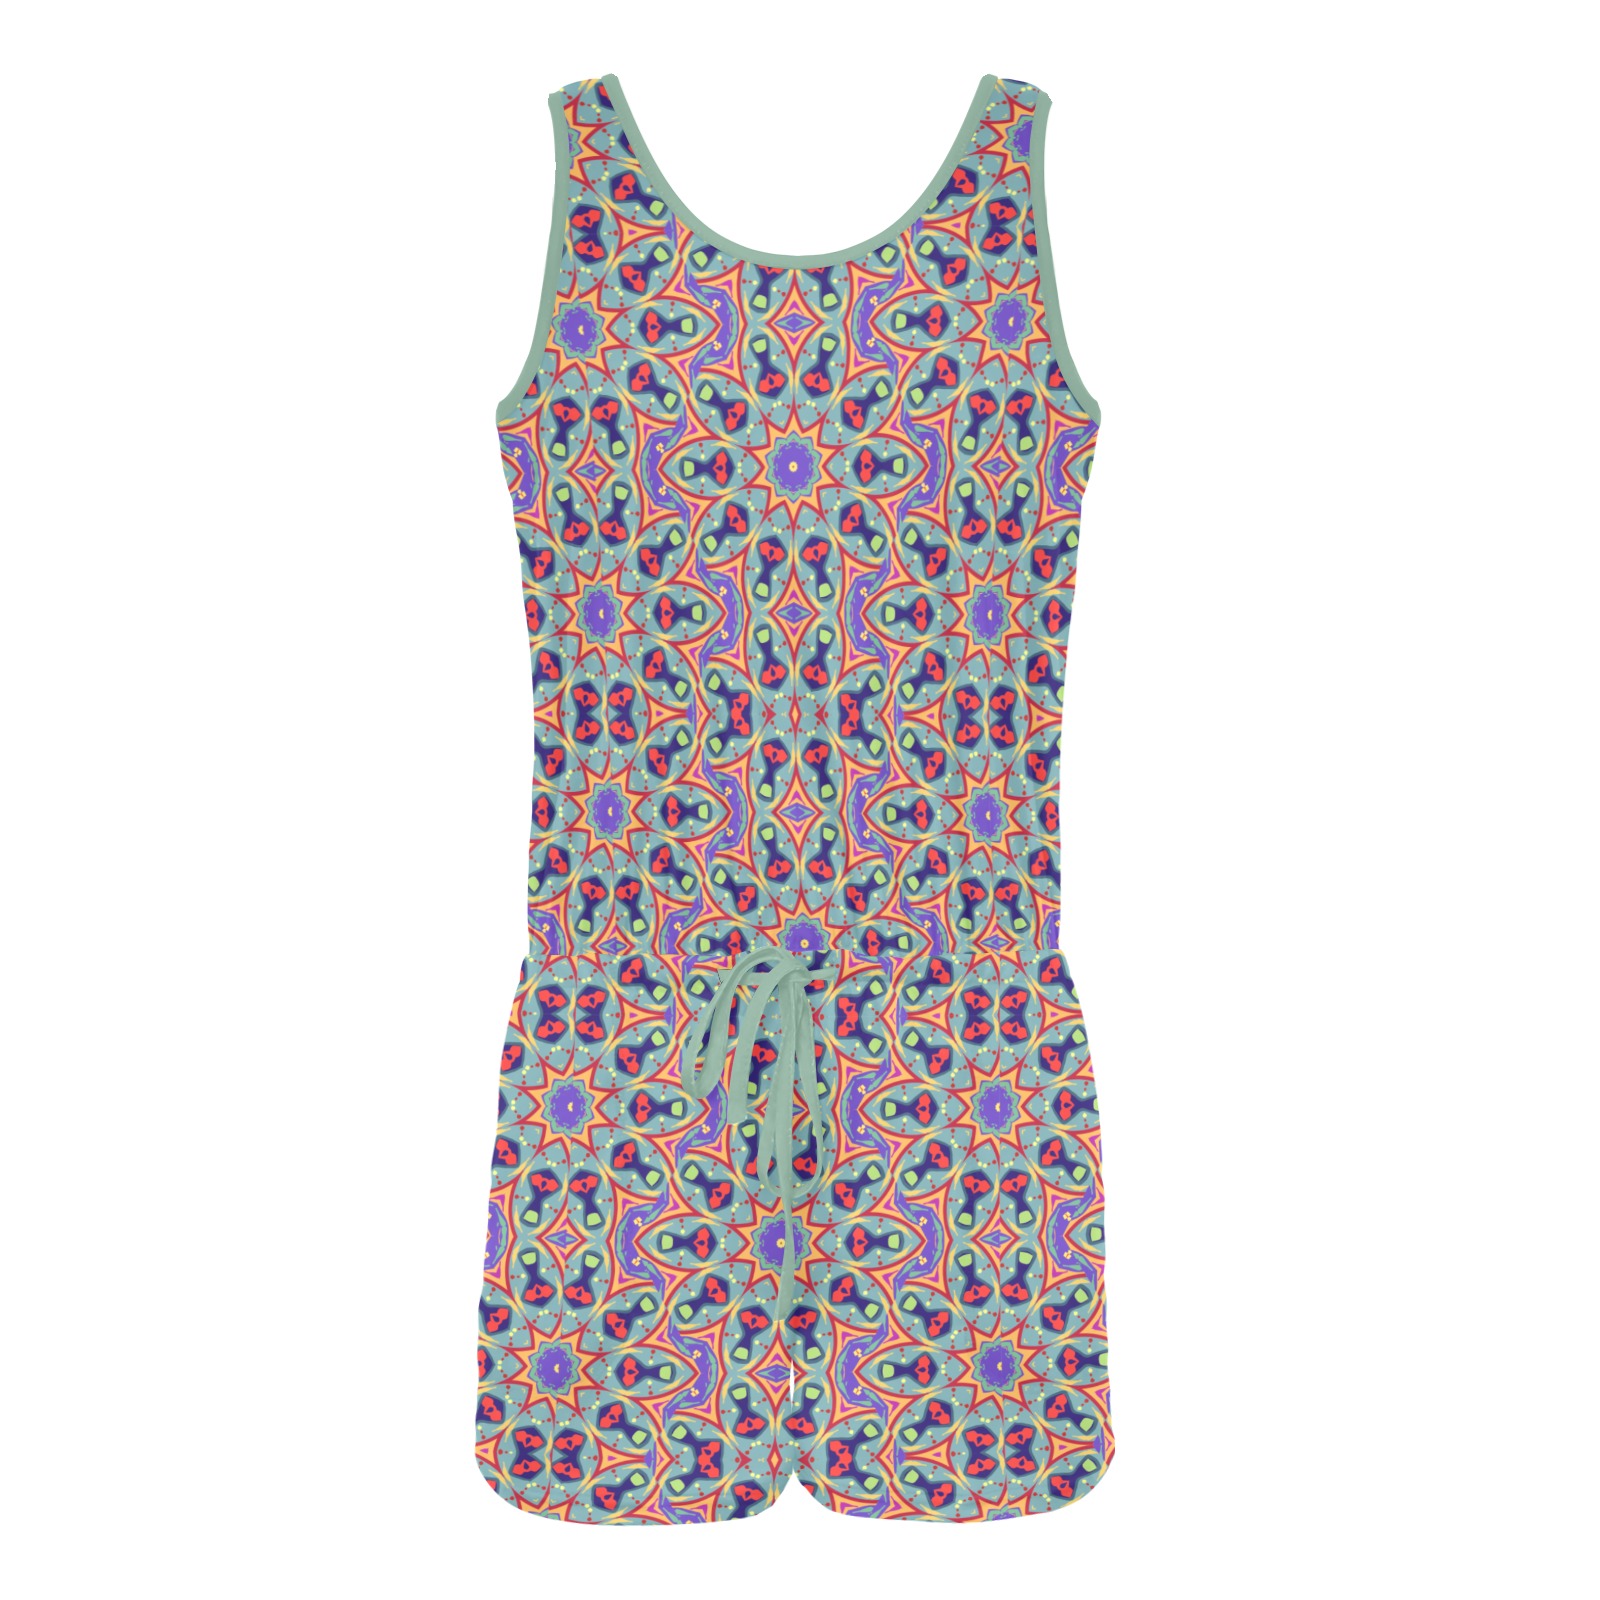 wowowow 2 All Over Print Vest Short Jumpsuit